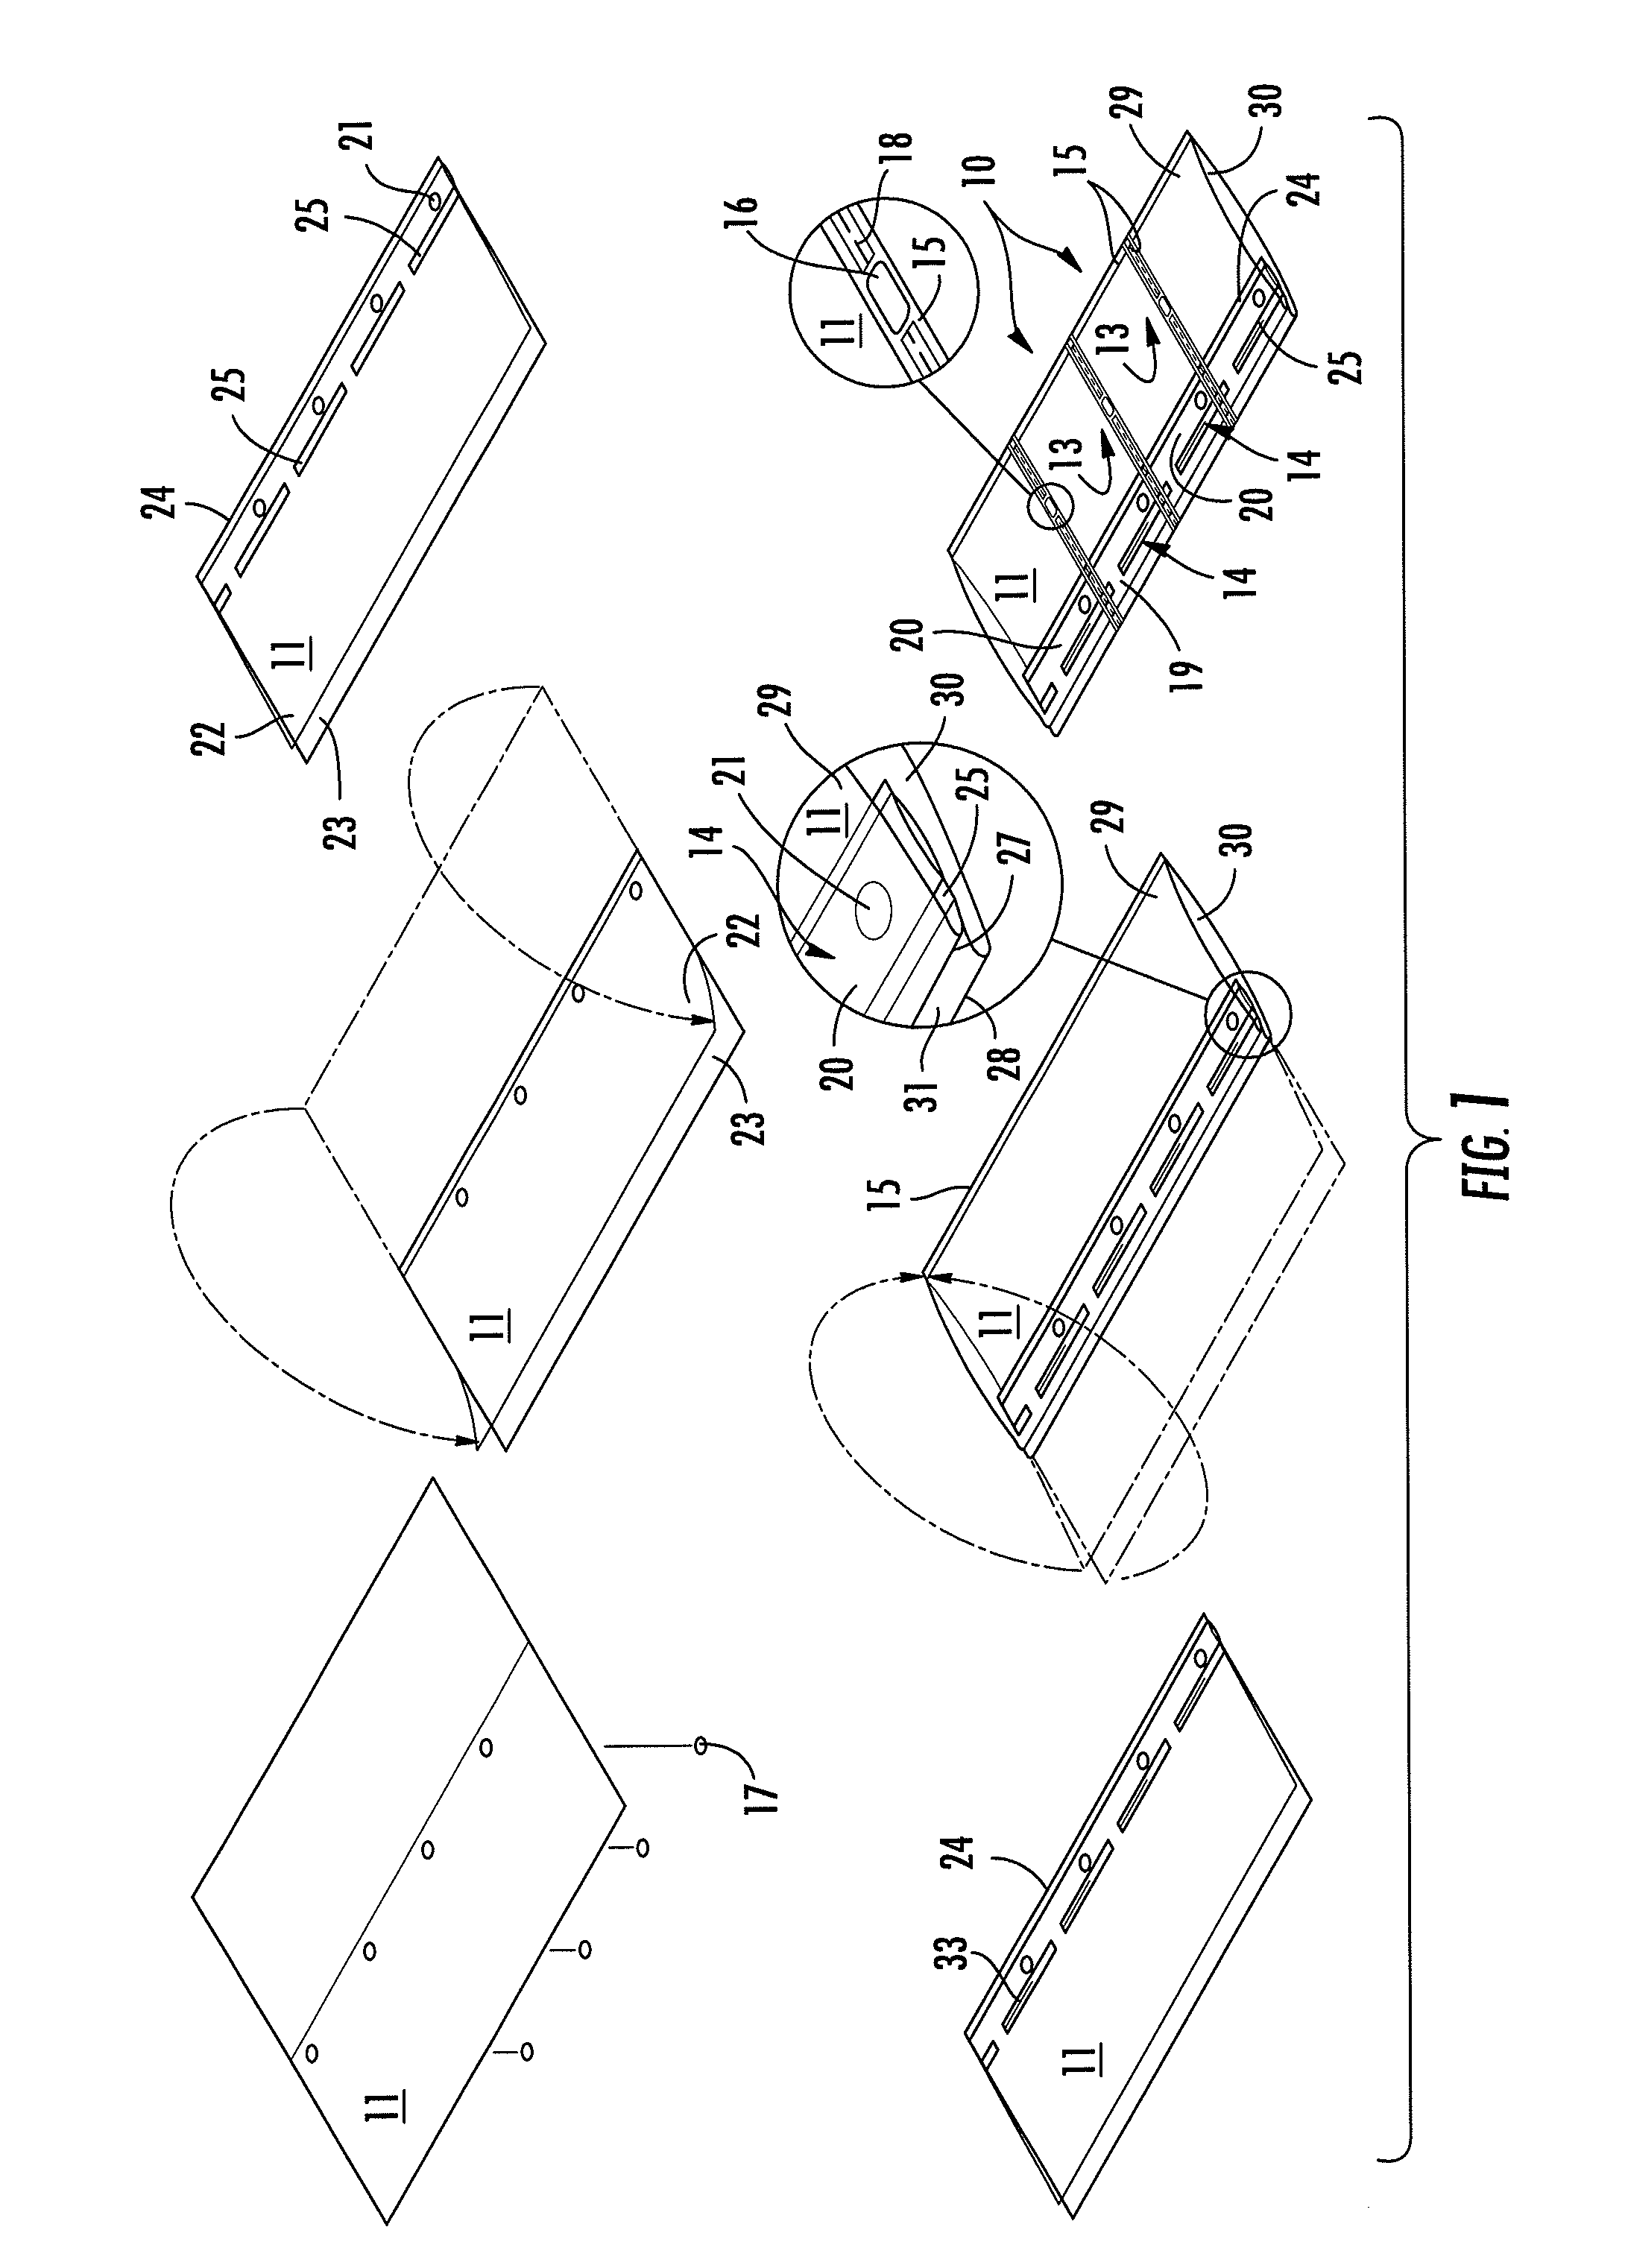 Inflatable structure for packaging and associated apparatus and methods